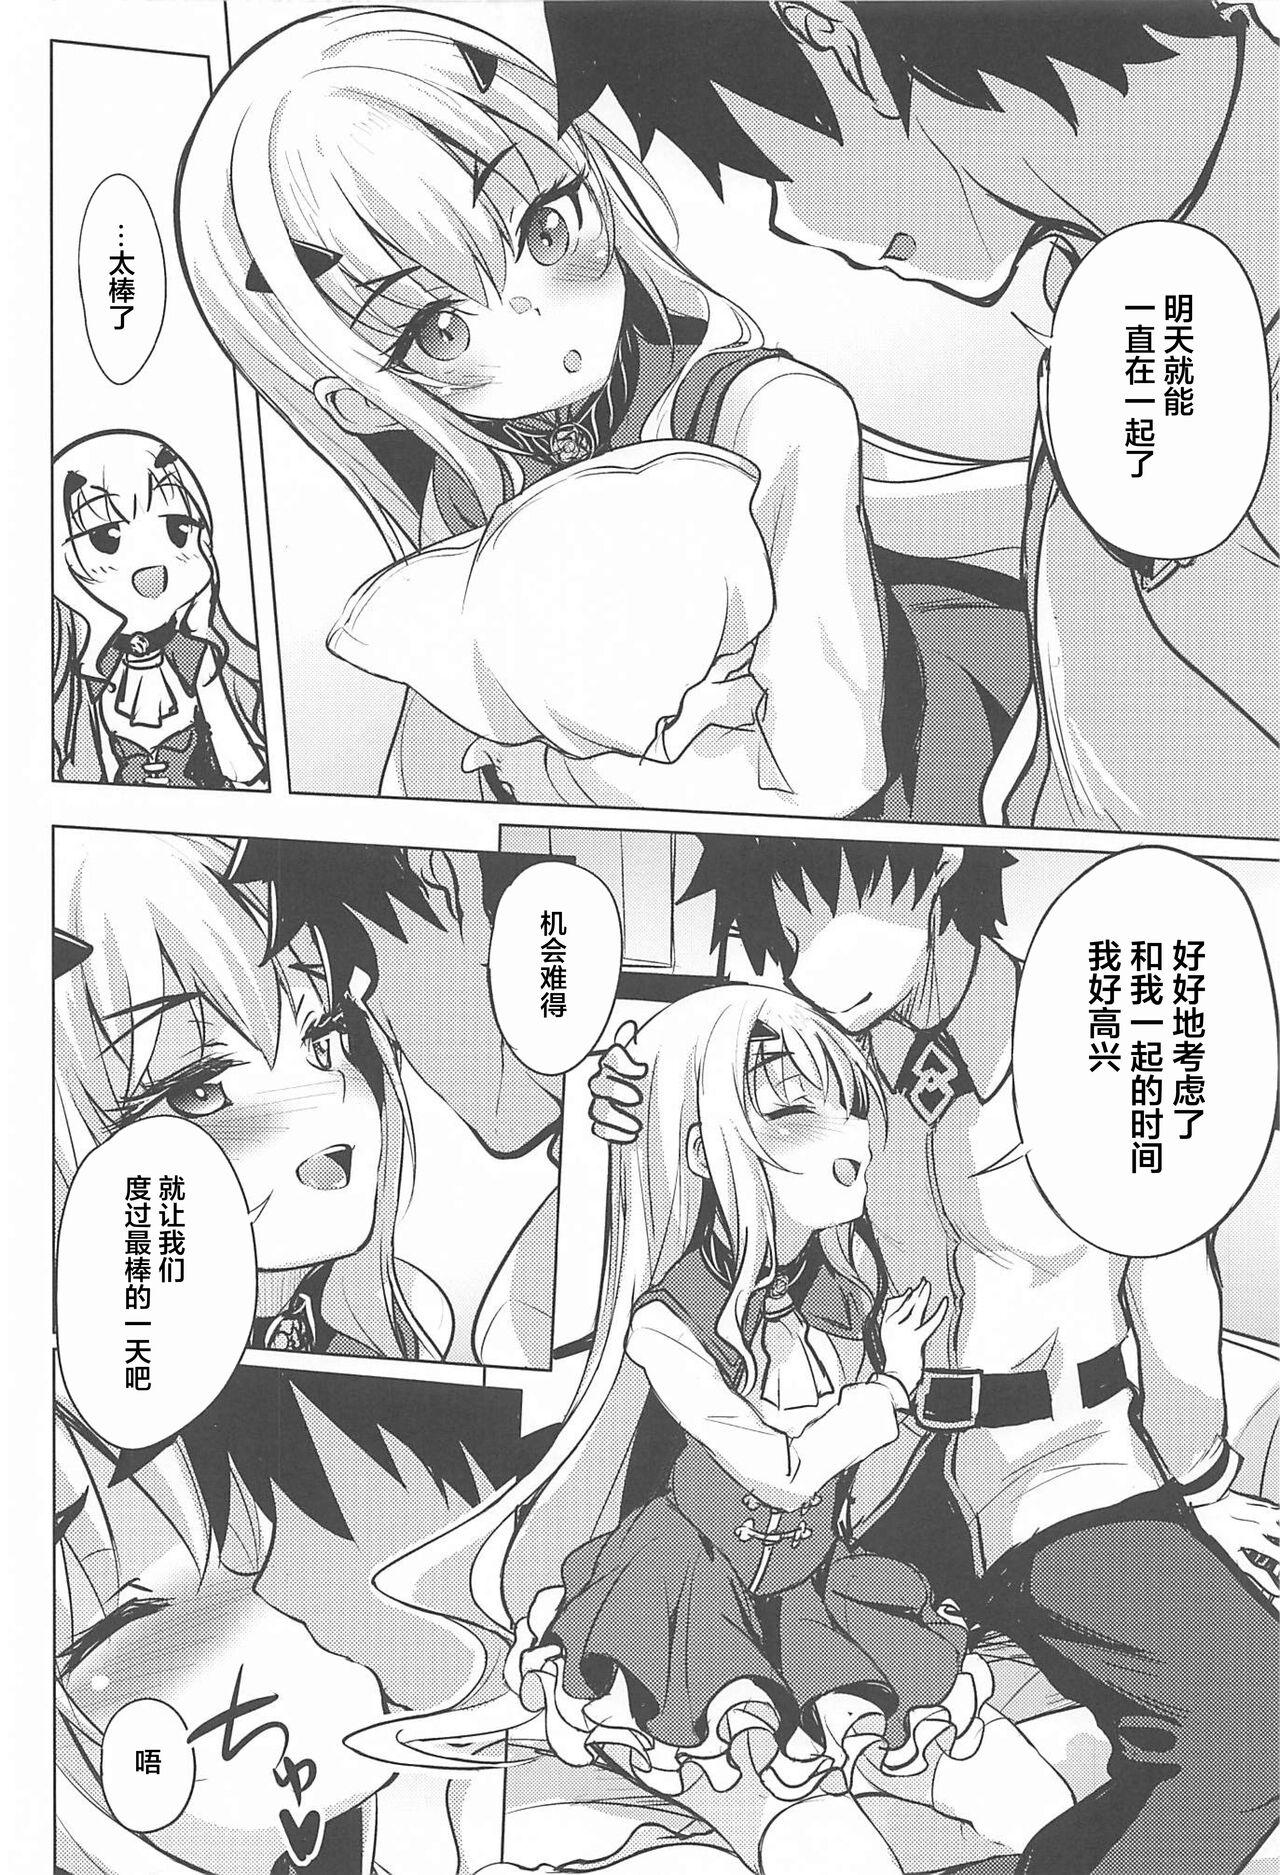 Camshow 休暇日和のメリュジーヌ - Fate grand order Hot - Page 4